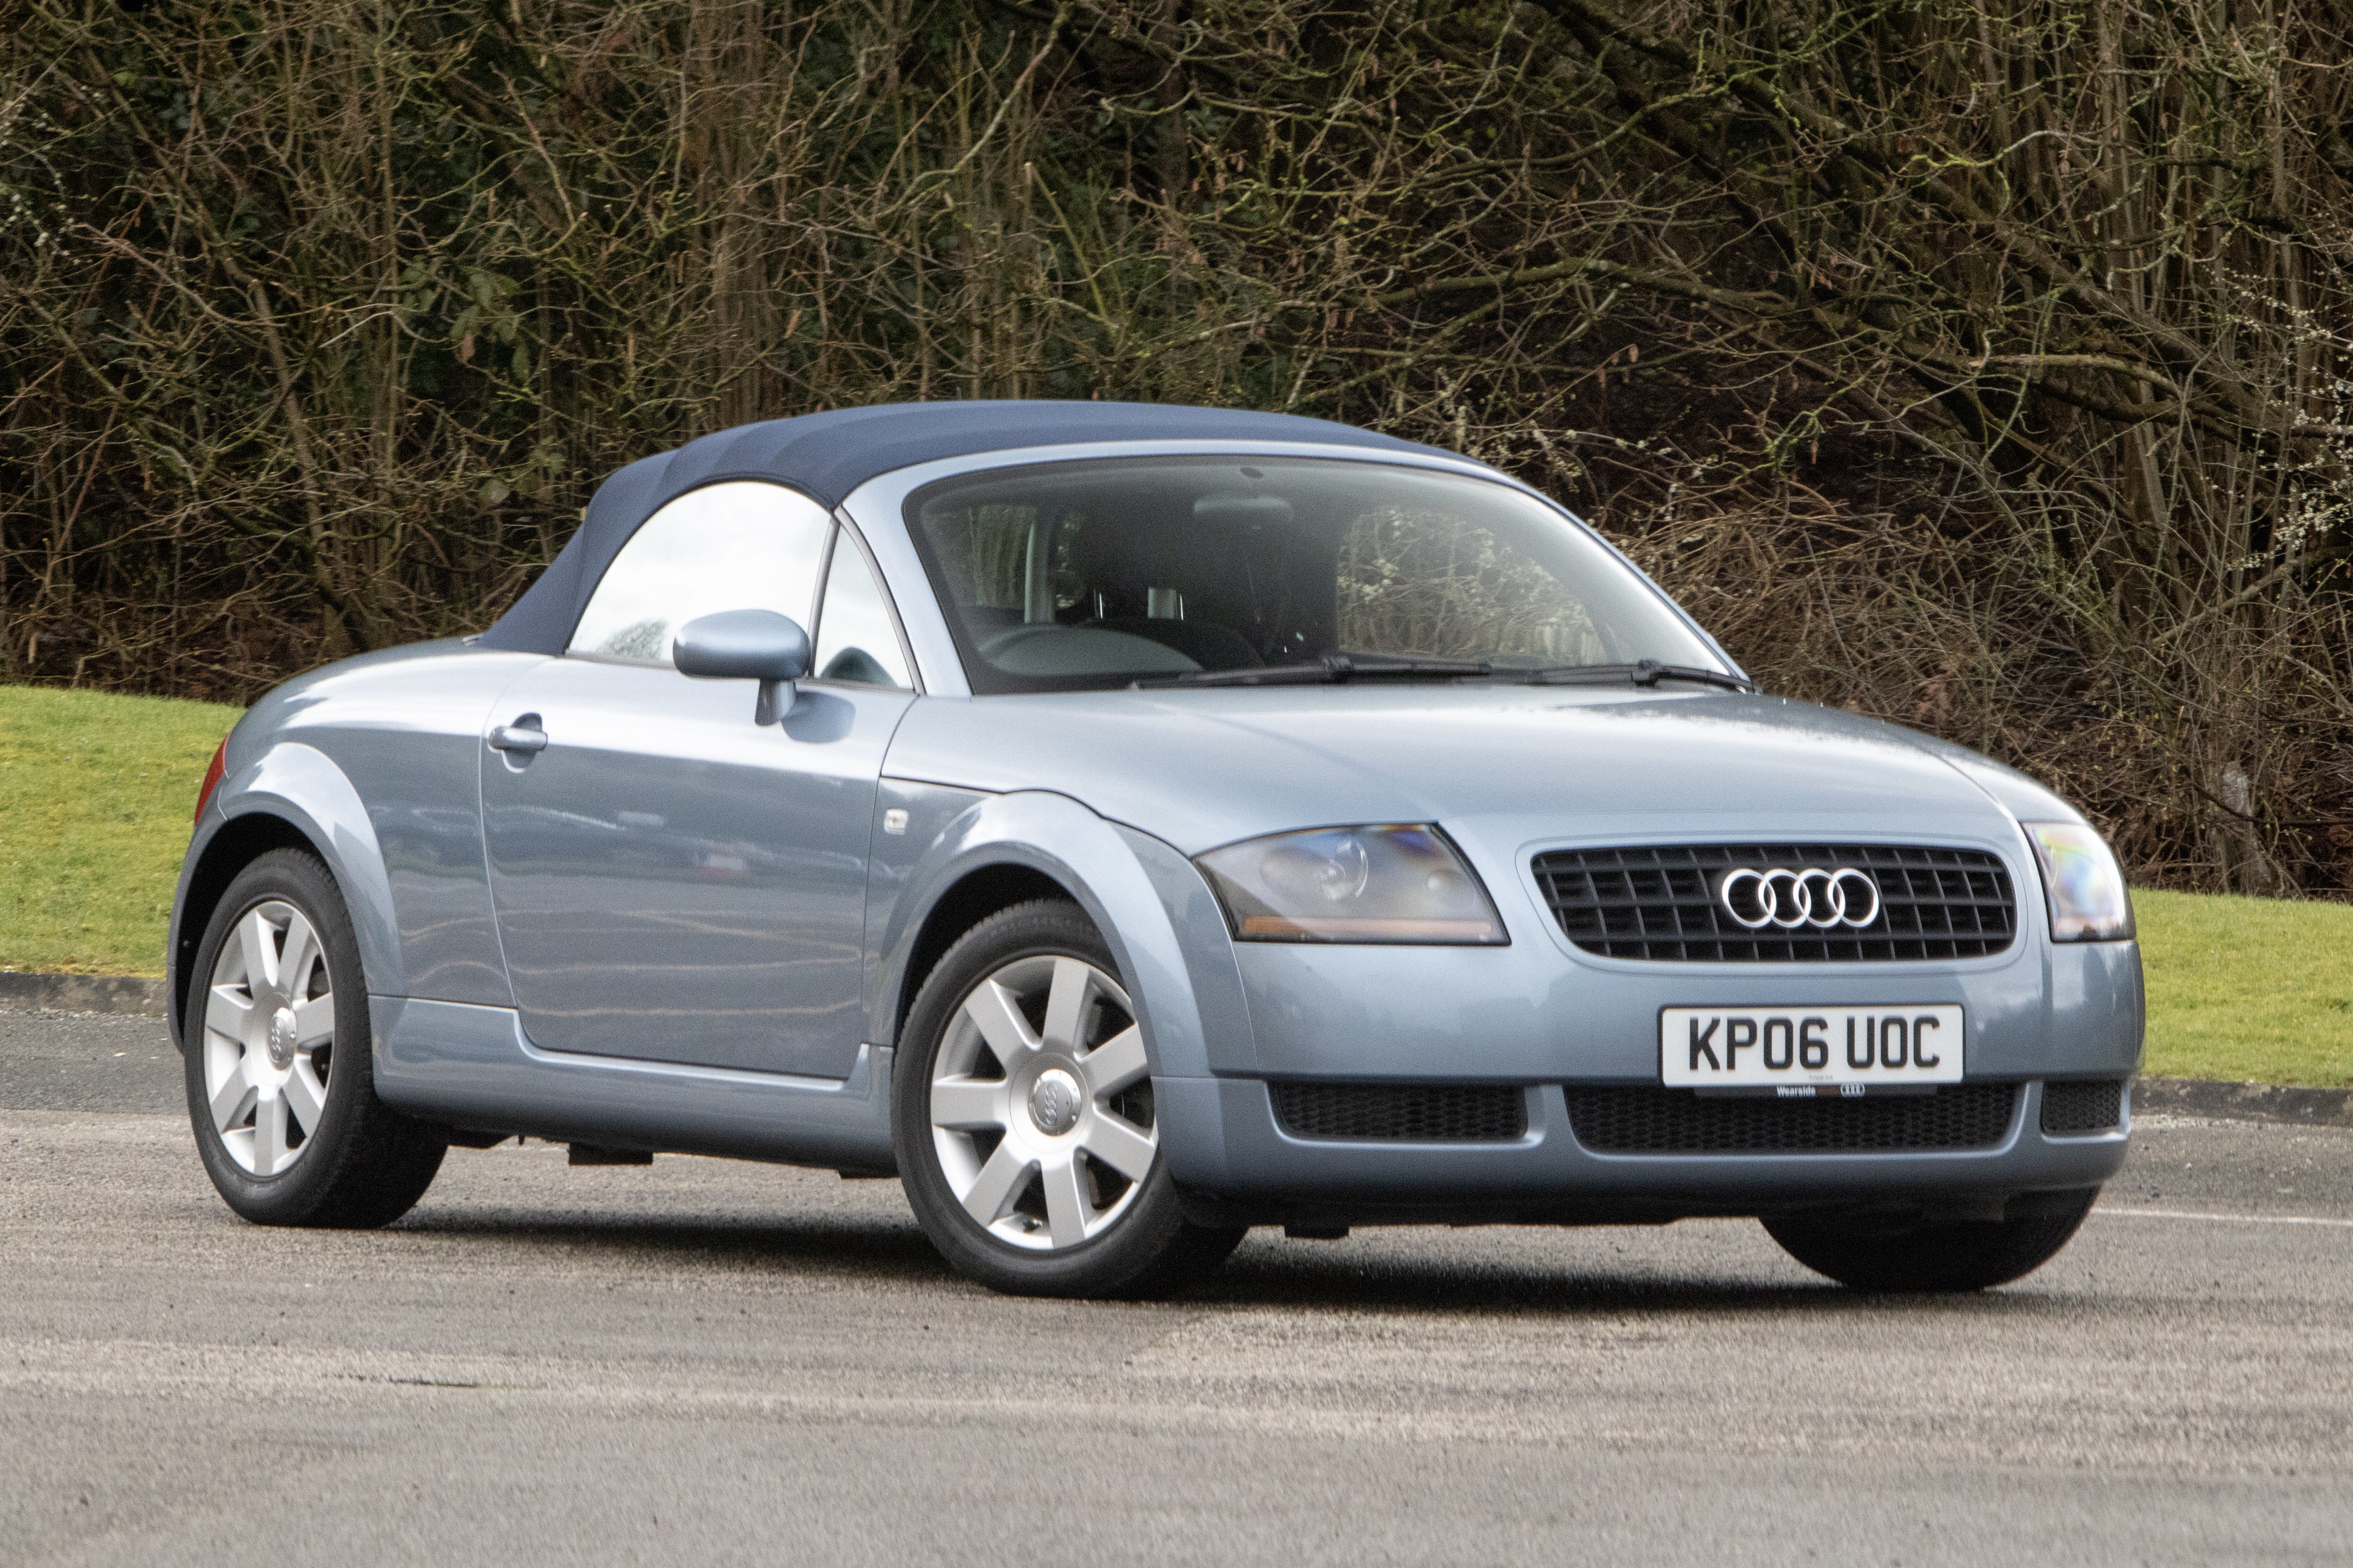 2002 AUDI TT 1.8T QUATTRO for sale by auction in Basingstoke, Hampshire,  United Kingdom